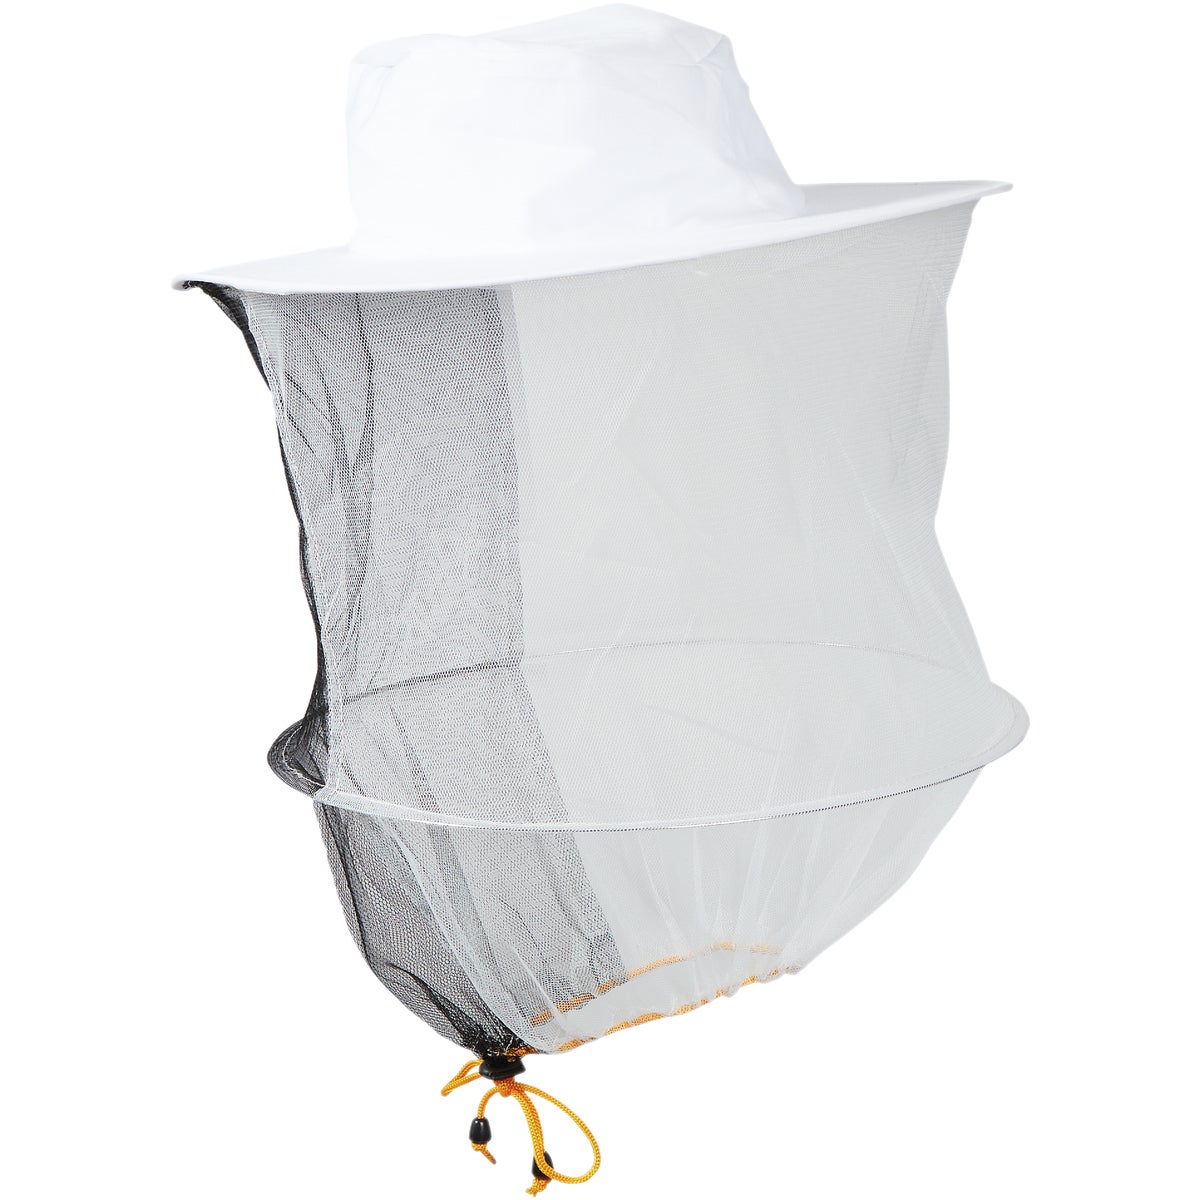 Item 704039, Beekeeping protective veil ideal to be worn to protect your head and neck 